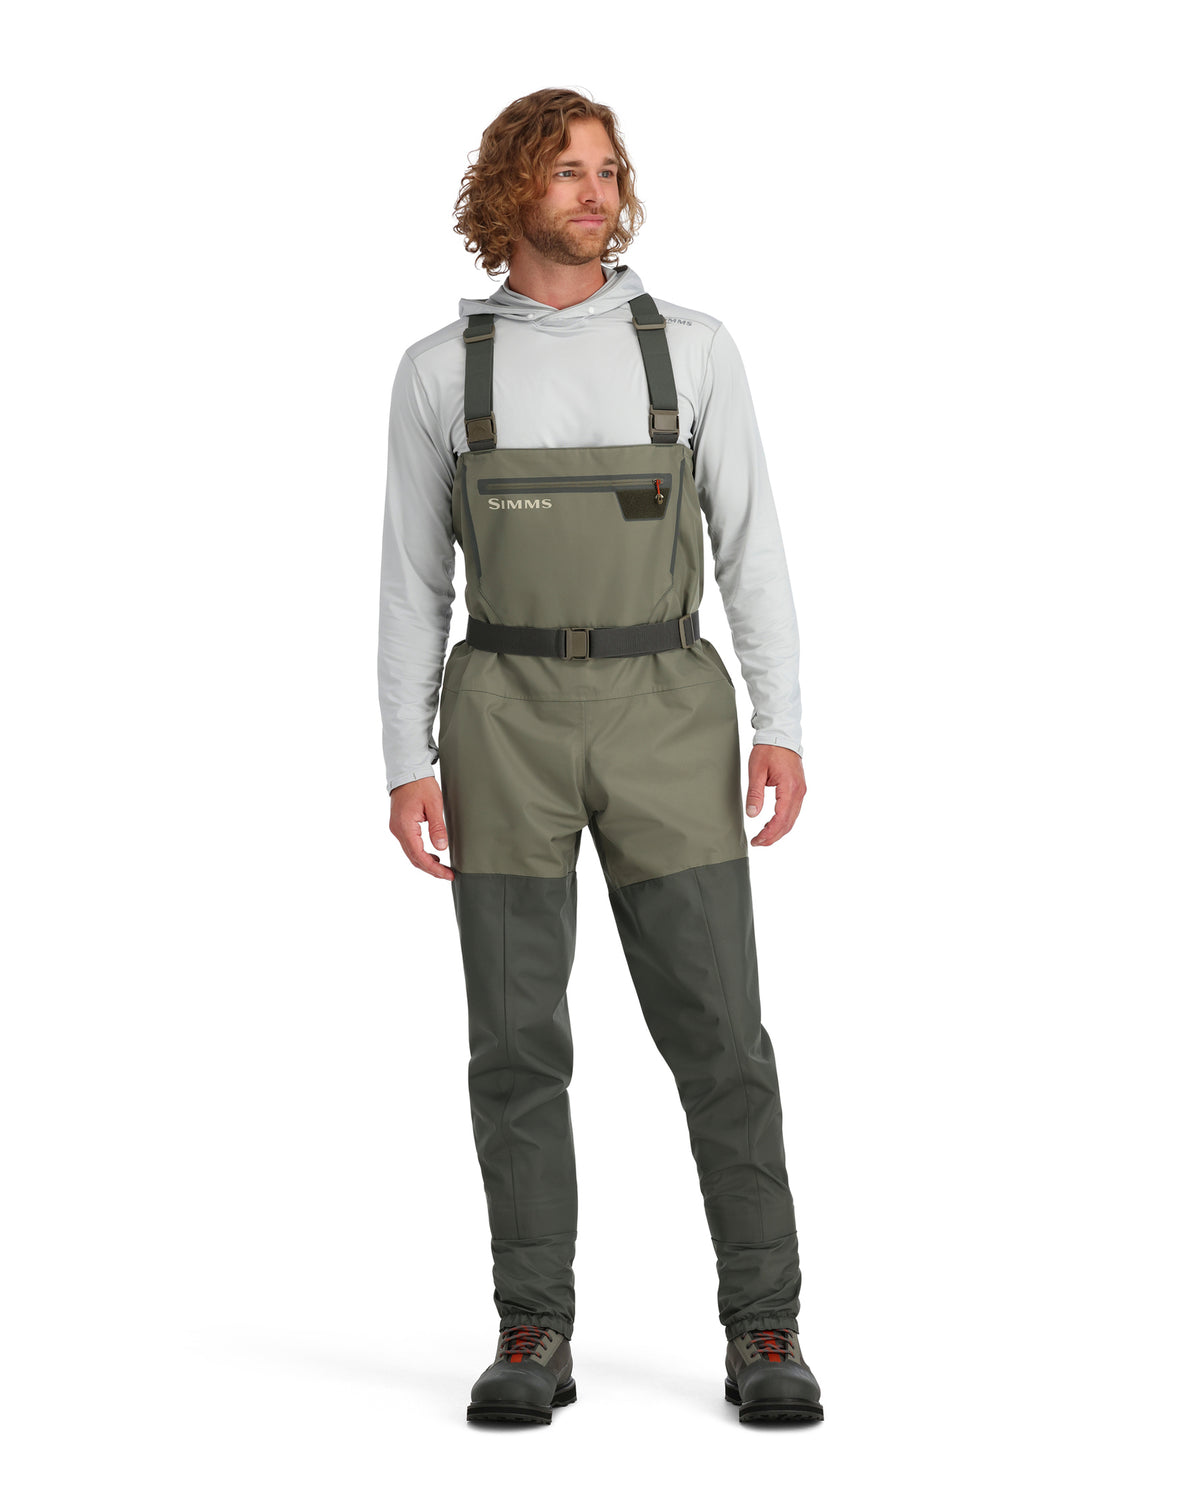 Tributary Fishing Vest  Simms Fishing Products